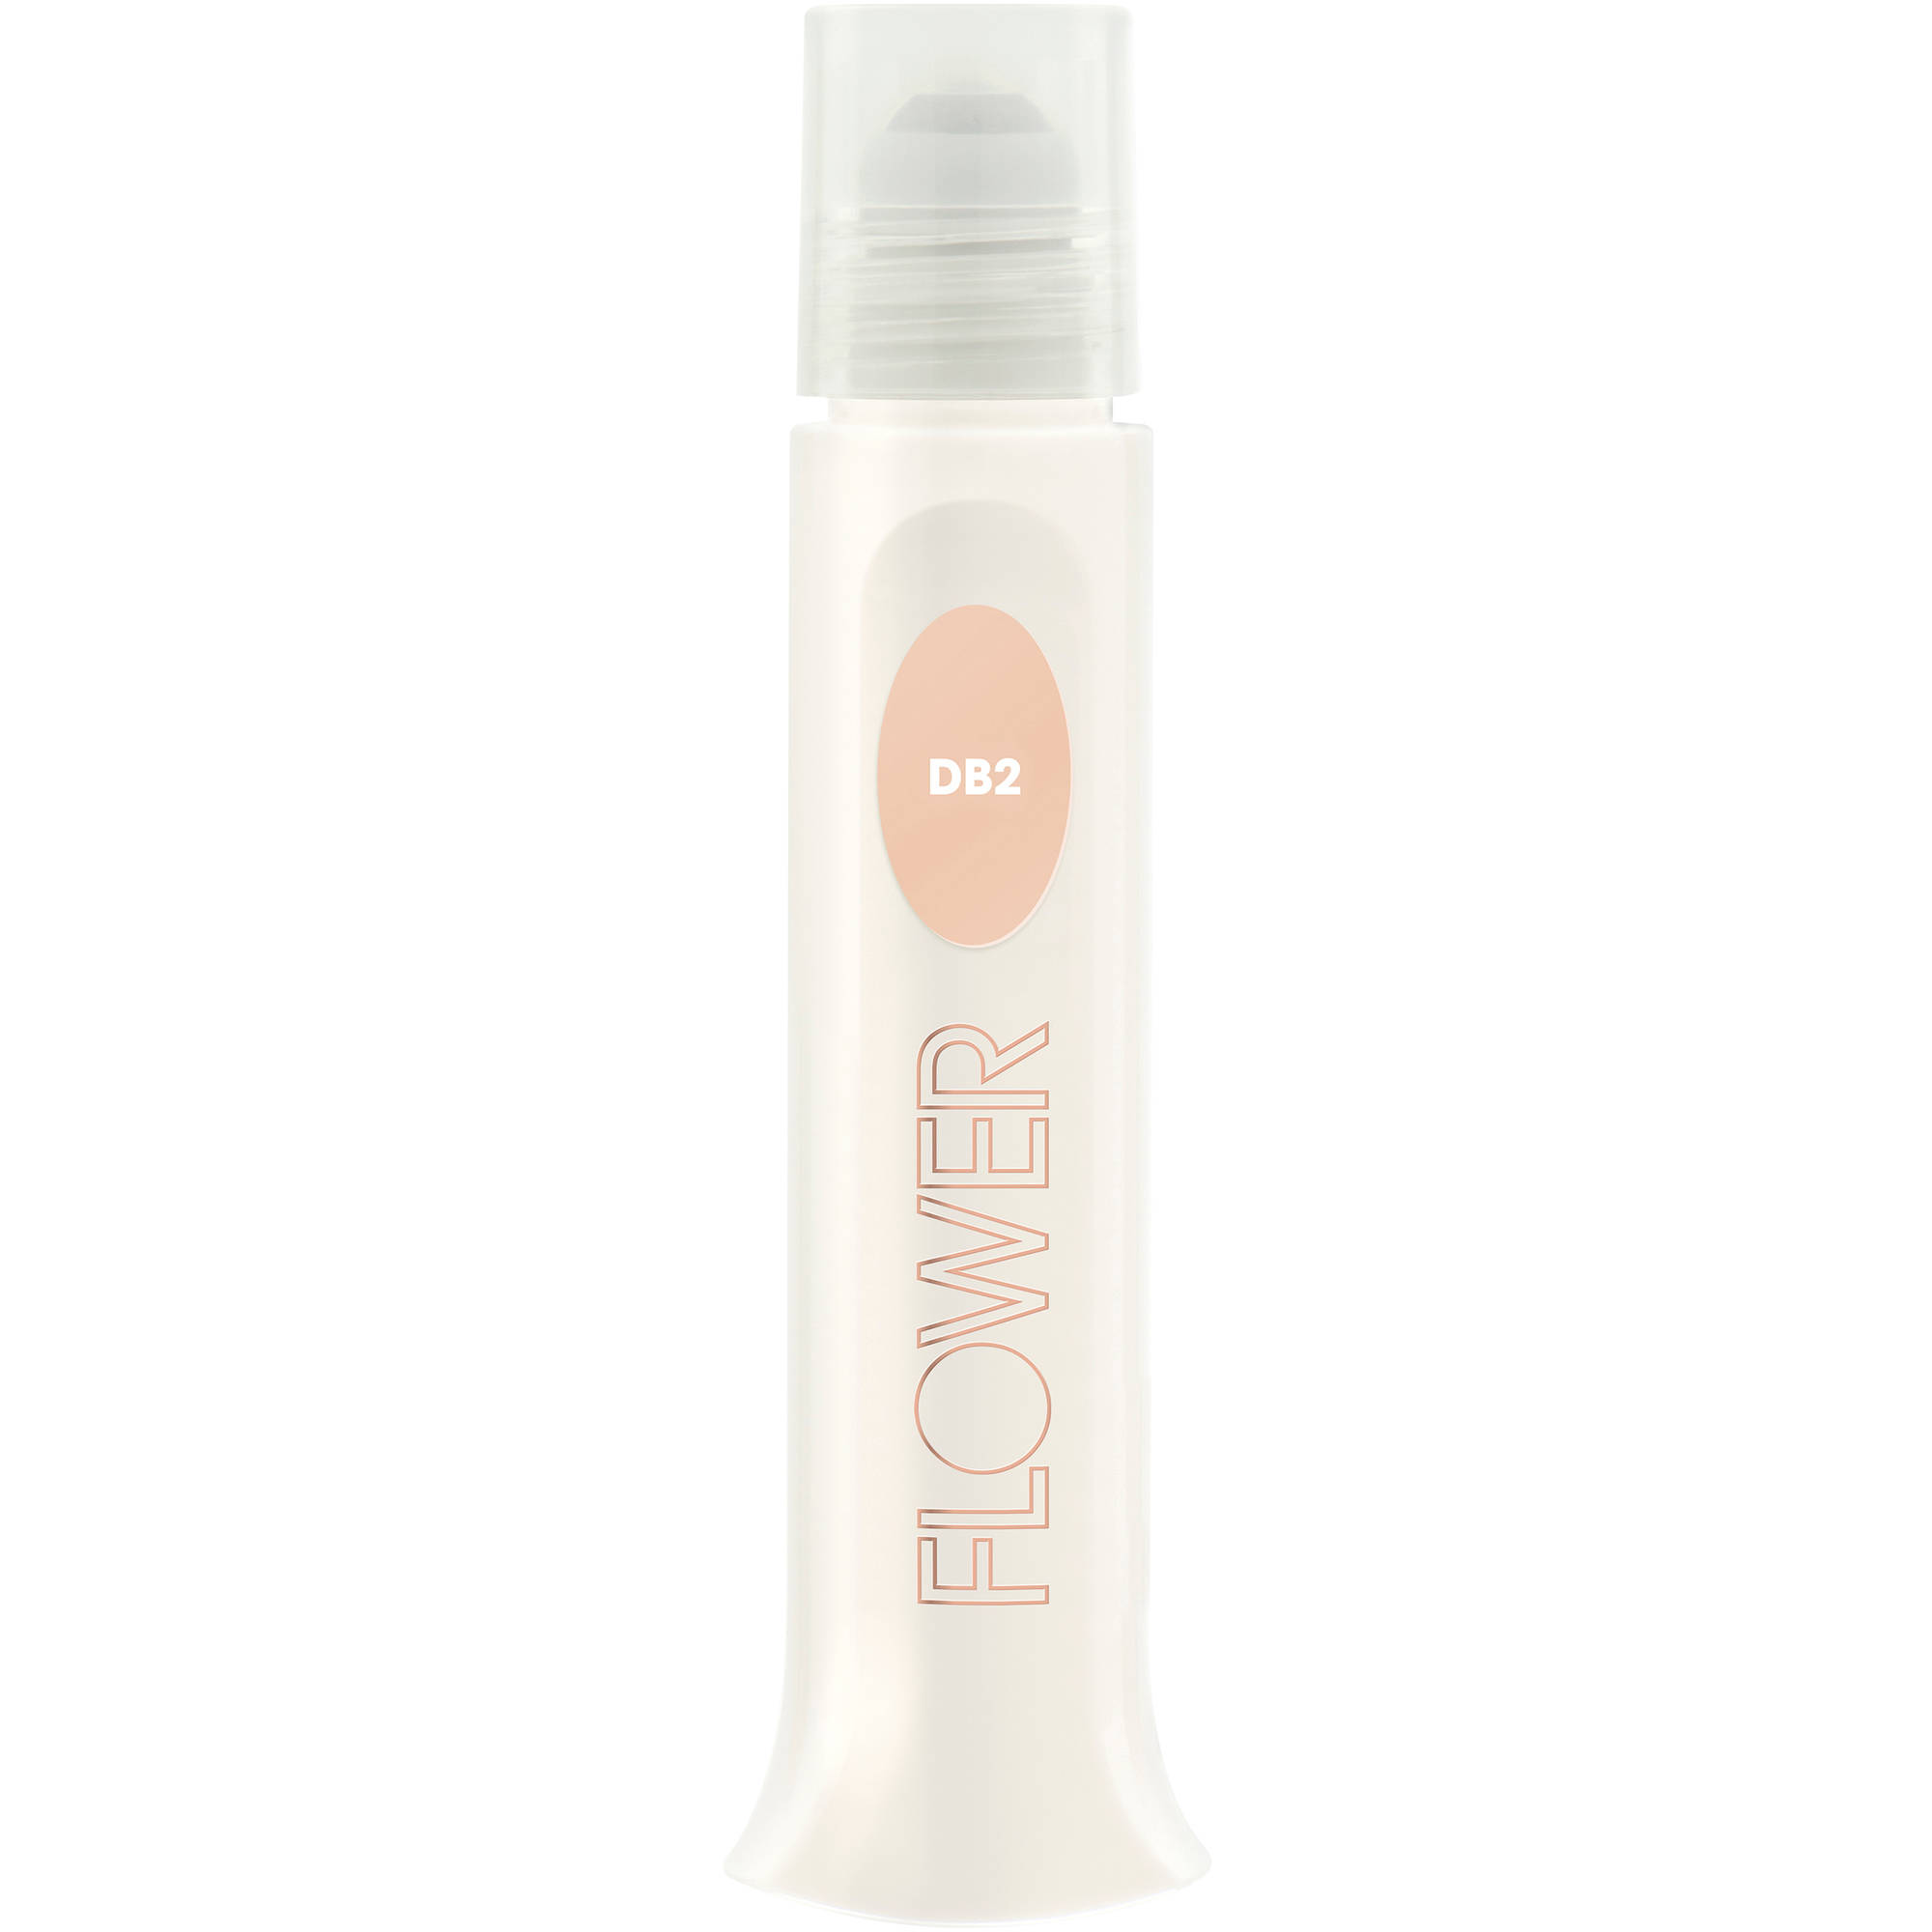 Flower D.B. Daily Brightening Undereye Cover Cream Concealer, DB2 - image 1 of 2